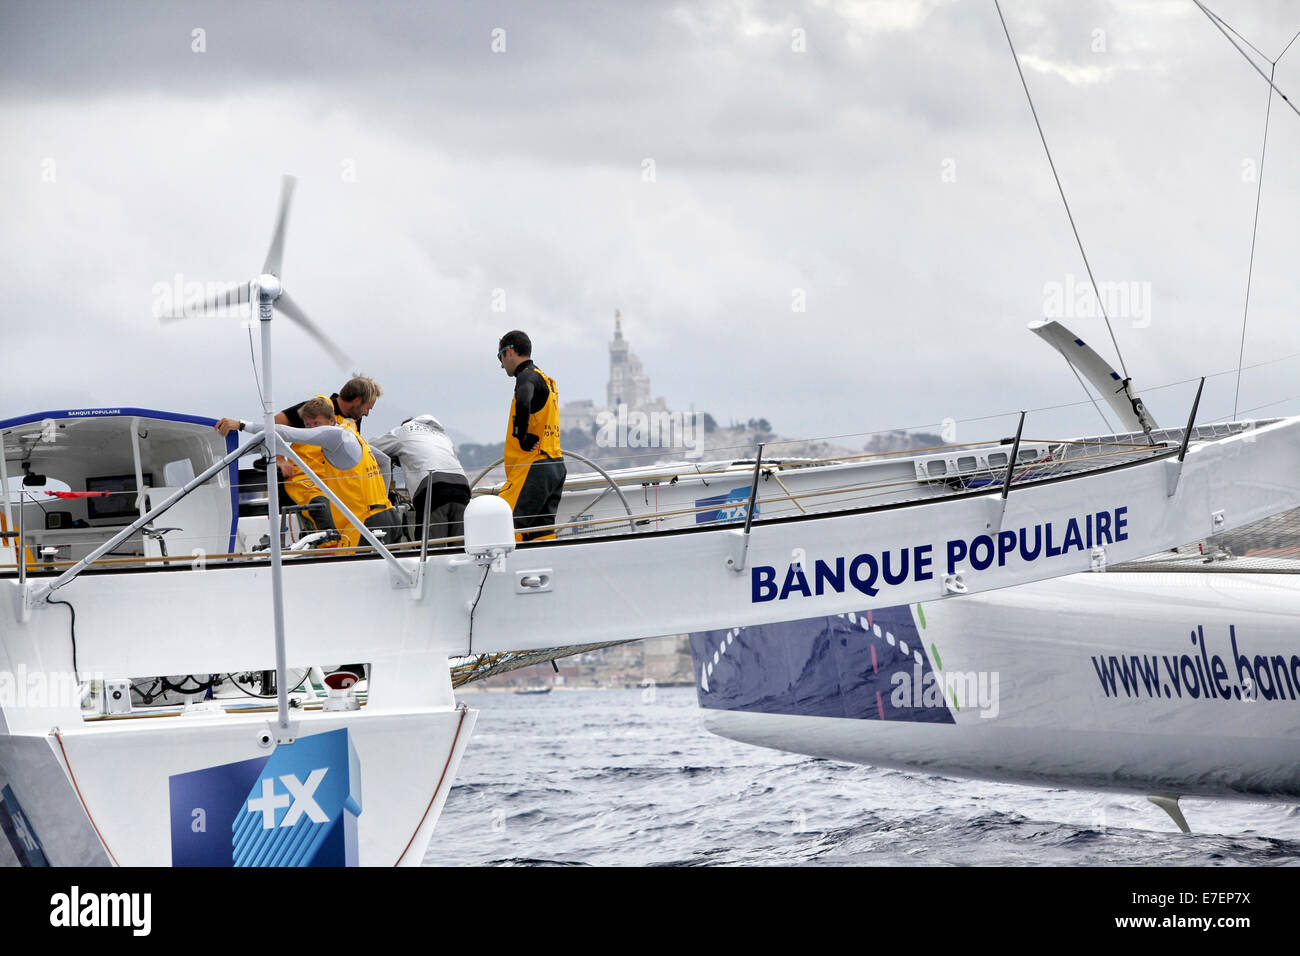 Armel Le Cléac?h and the Maxi Trimaran Solo Banque Populaire VII Trans at the start of the record attempt  Marseille ? Carthage. Stock Photo